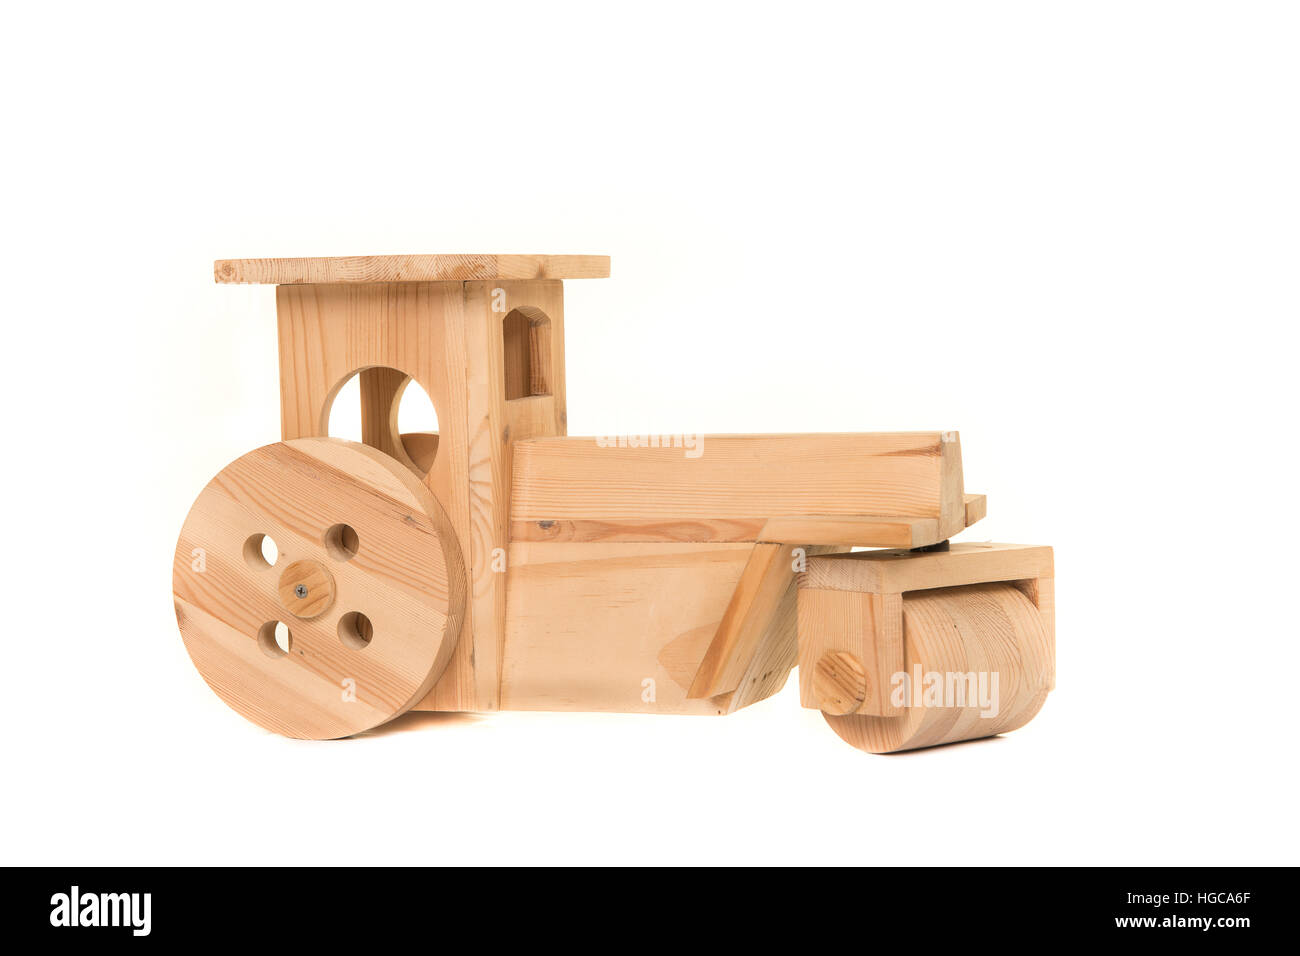 Wooden made toy tractor isolated on a white background Stock Photo